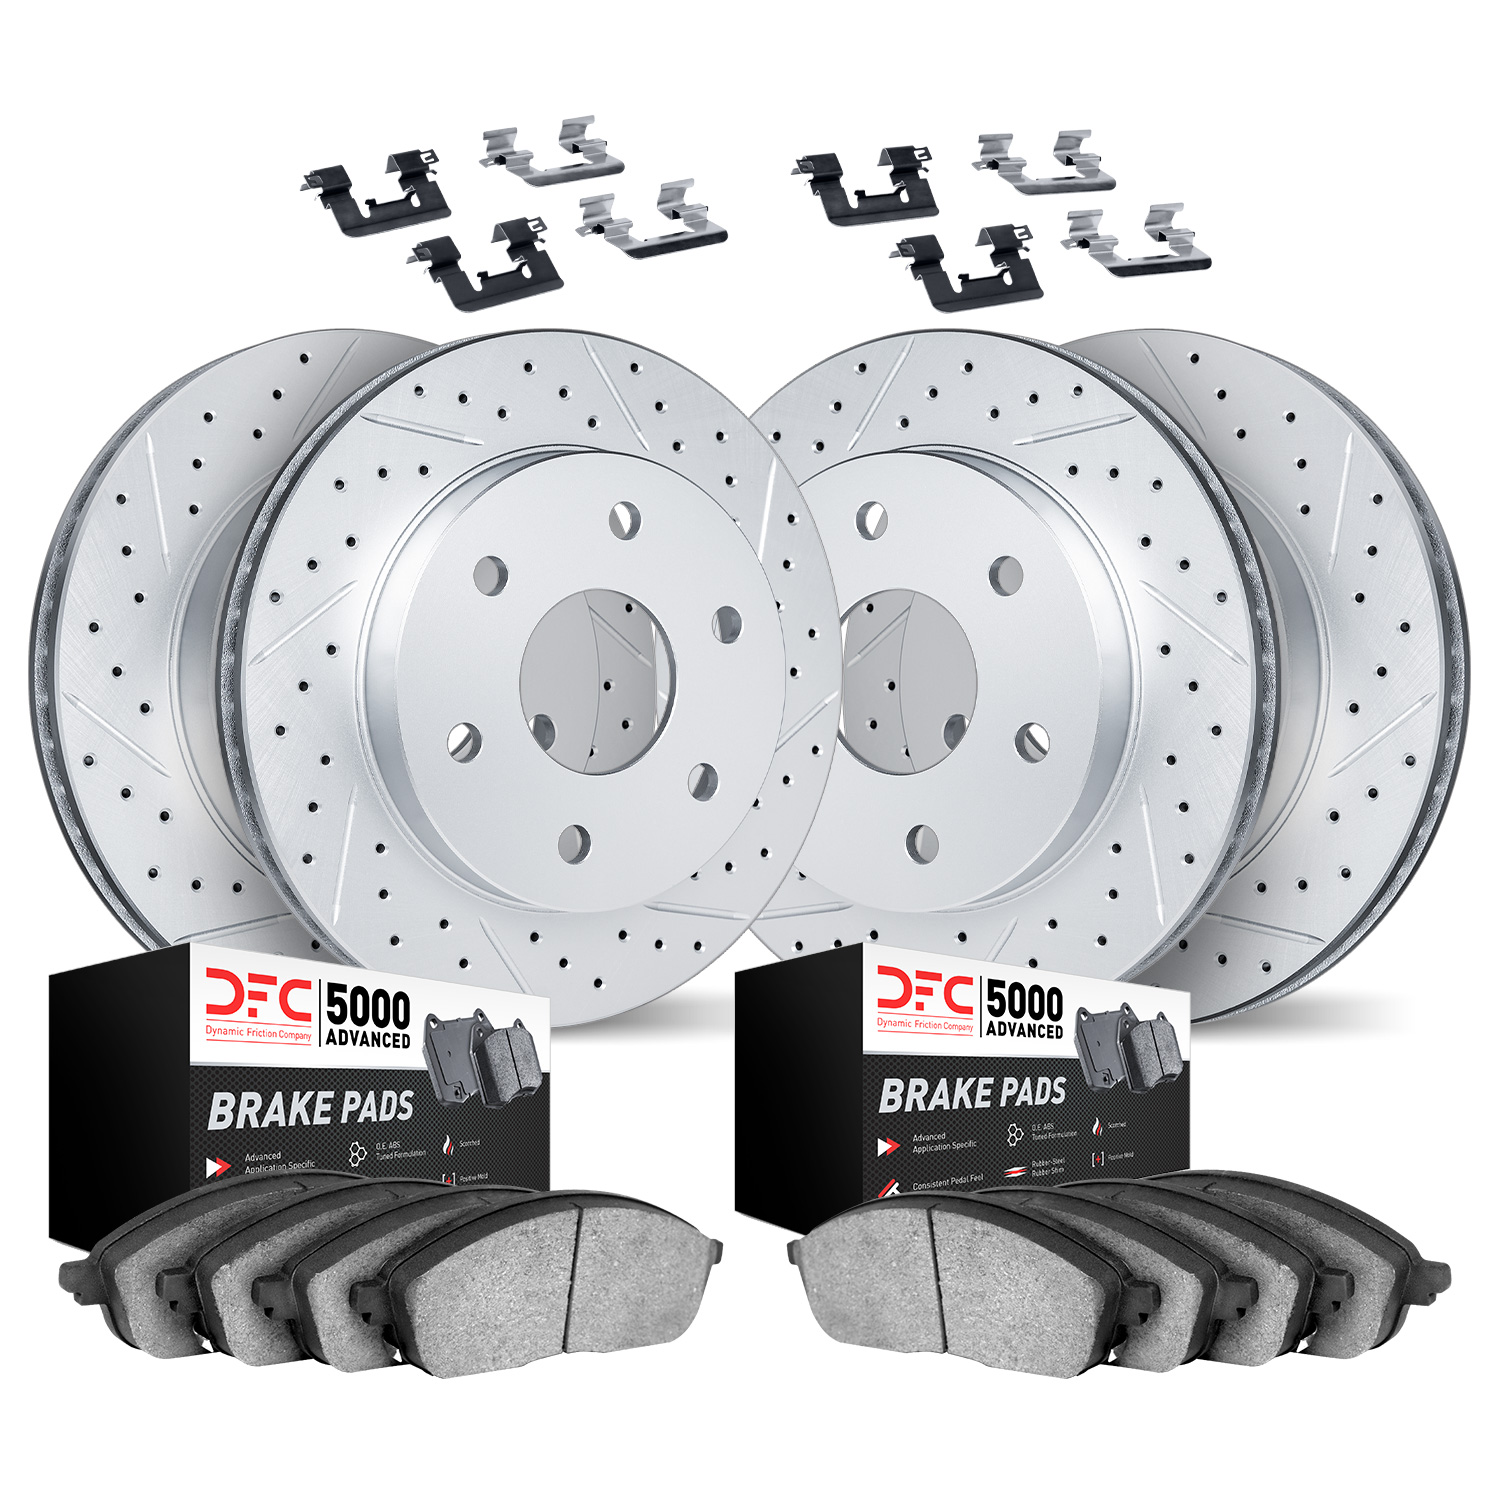 2514-48020 Geoperformance Drilled/Slotted Rotors w/5000 Advanced Brake Pads Kit & Hardware, 2000-2006 GM, Position: Front and Re